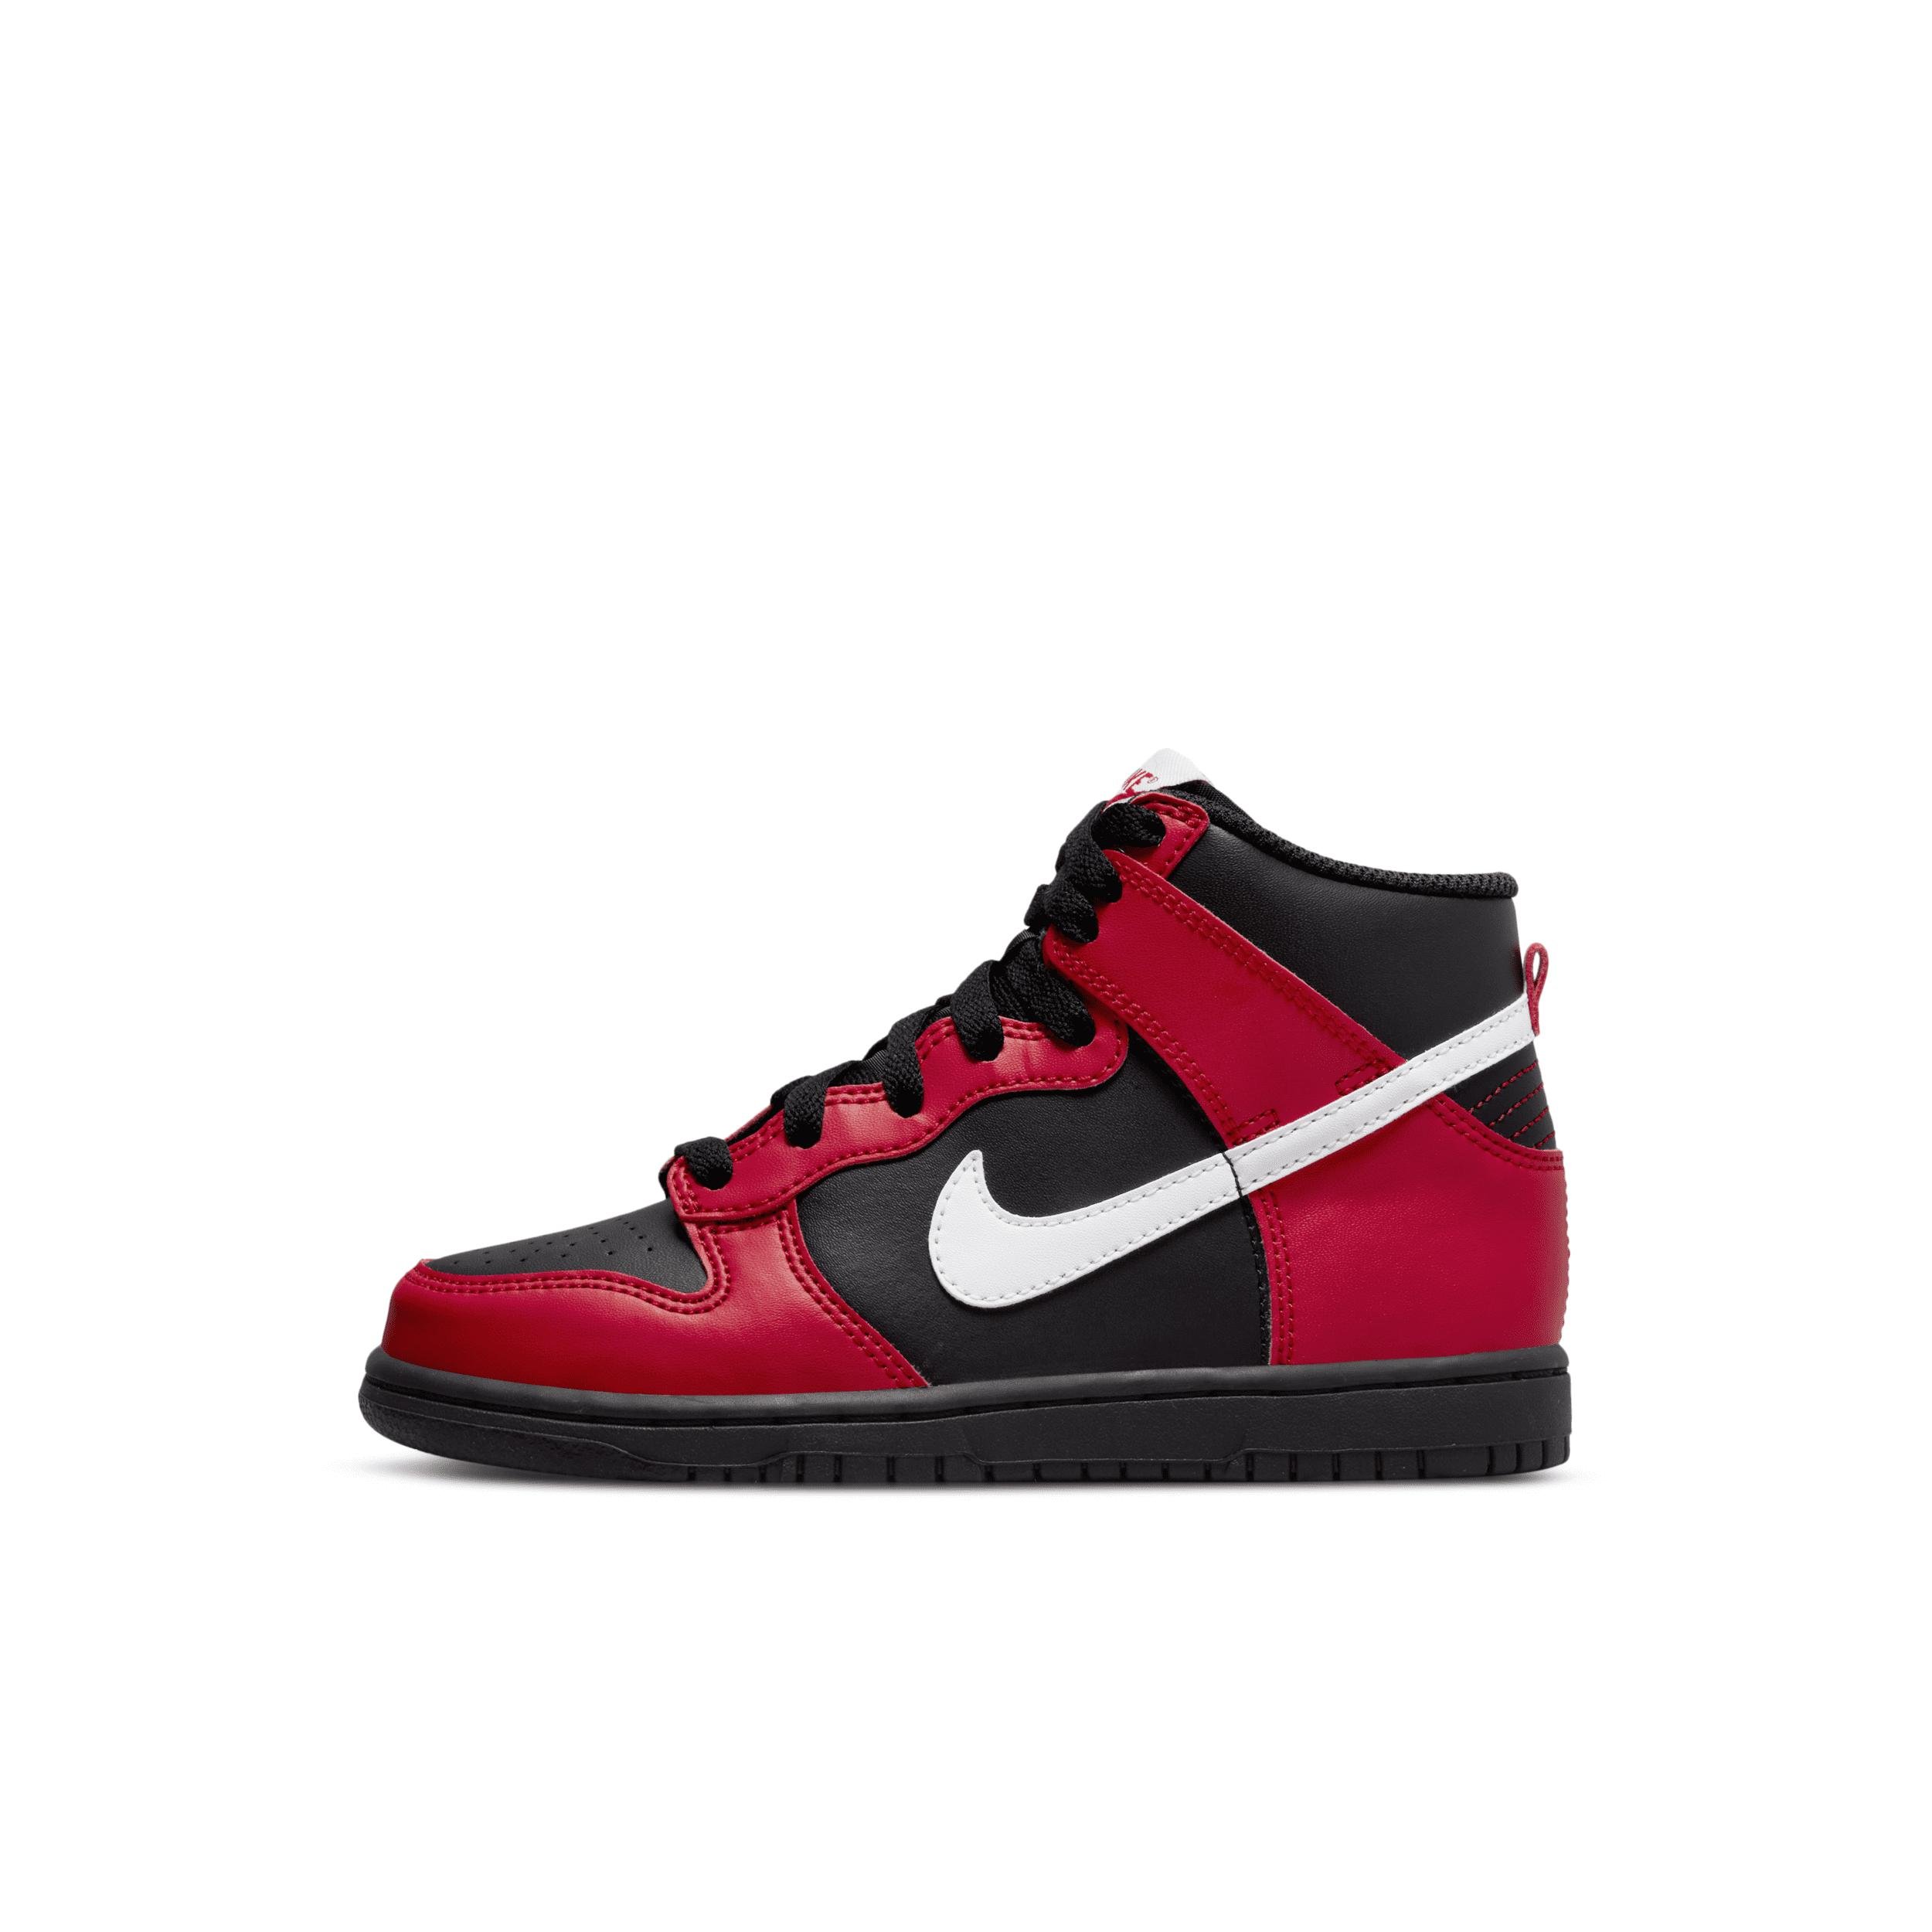 Nike Dunk High Little Kids' Shoes by NIKE